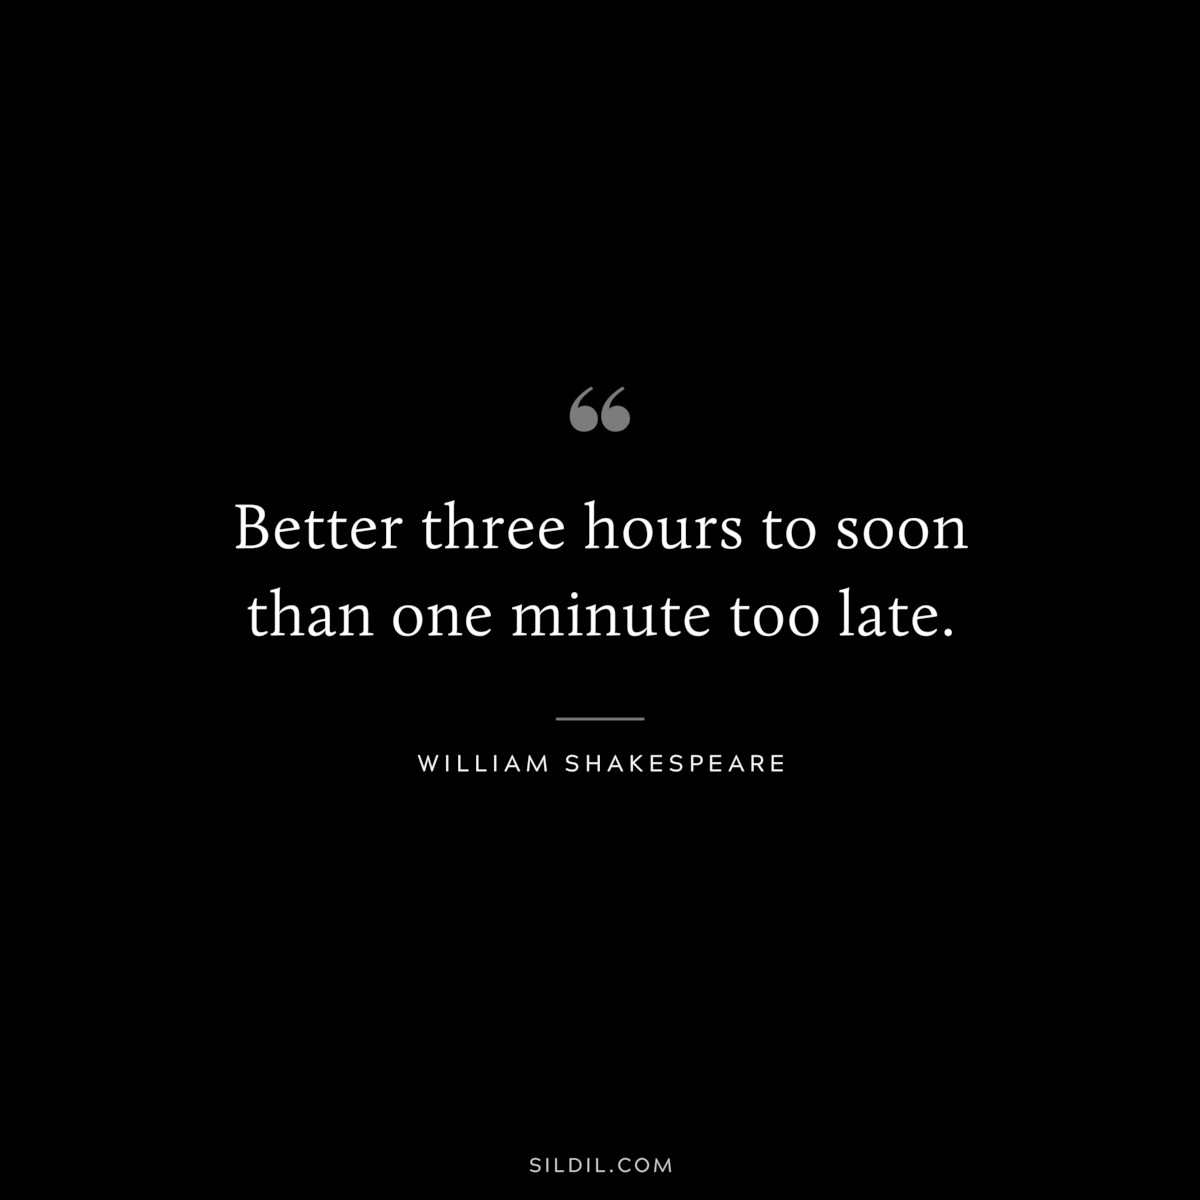 Better three hours to soon than one minute too late. ― William Shakespeare